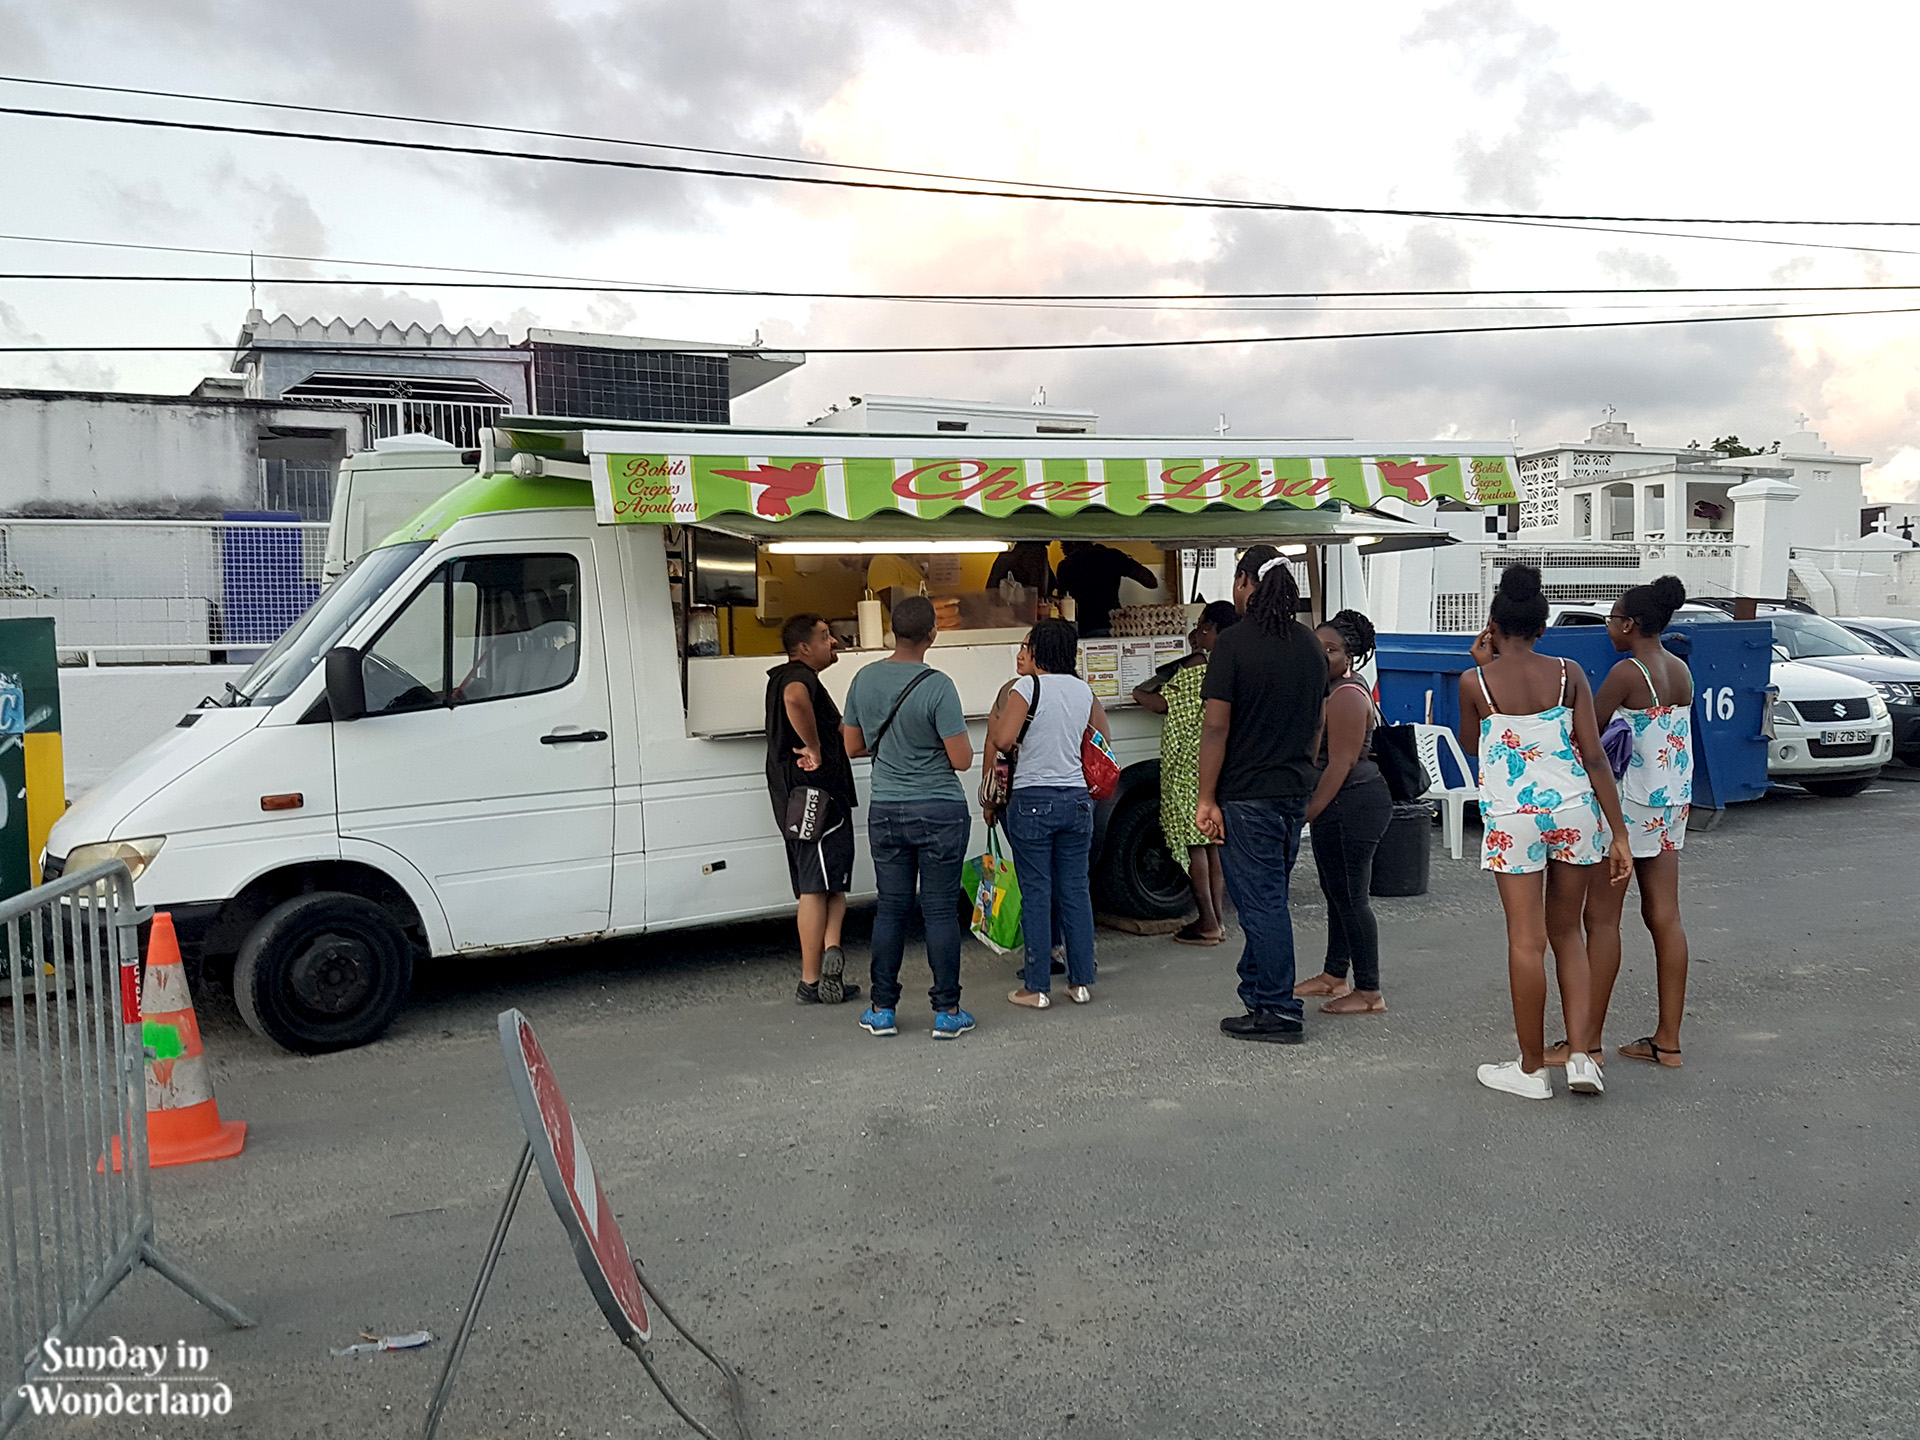 Food truck in front of the cemetery on All Saints' Day in Guadeloupe - Sunday in Wonderland Blog